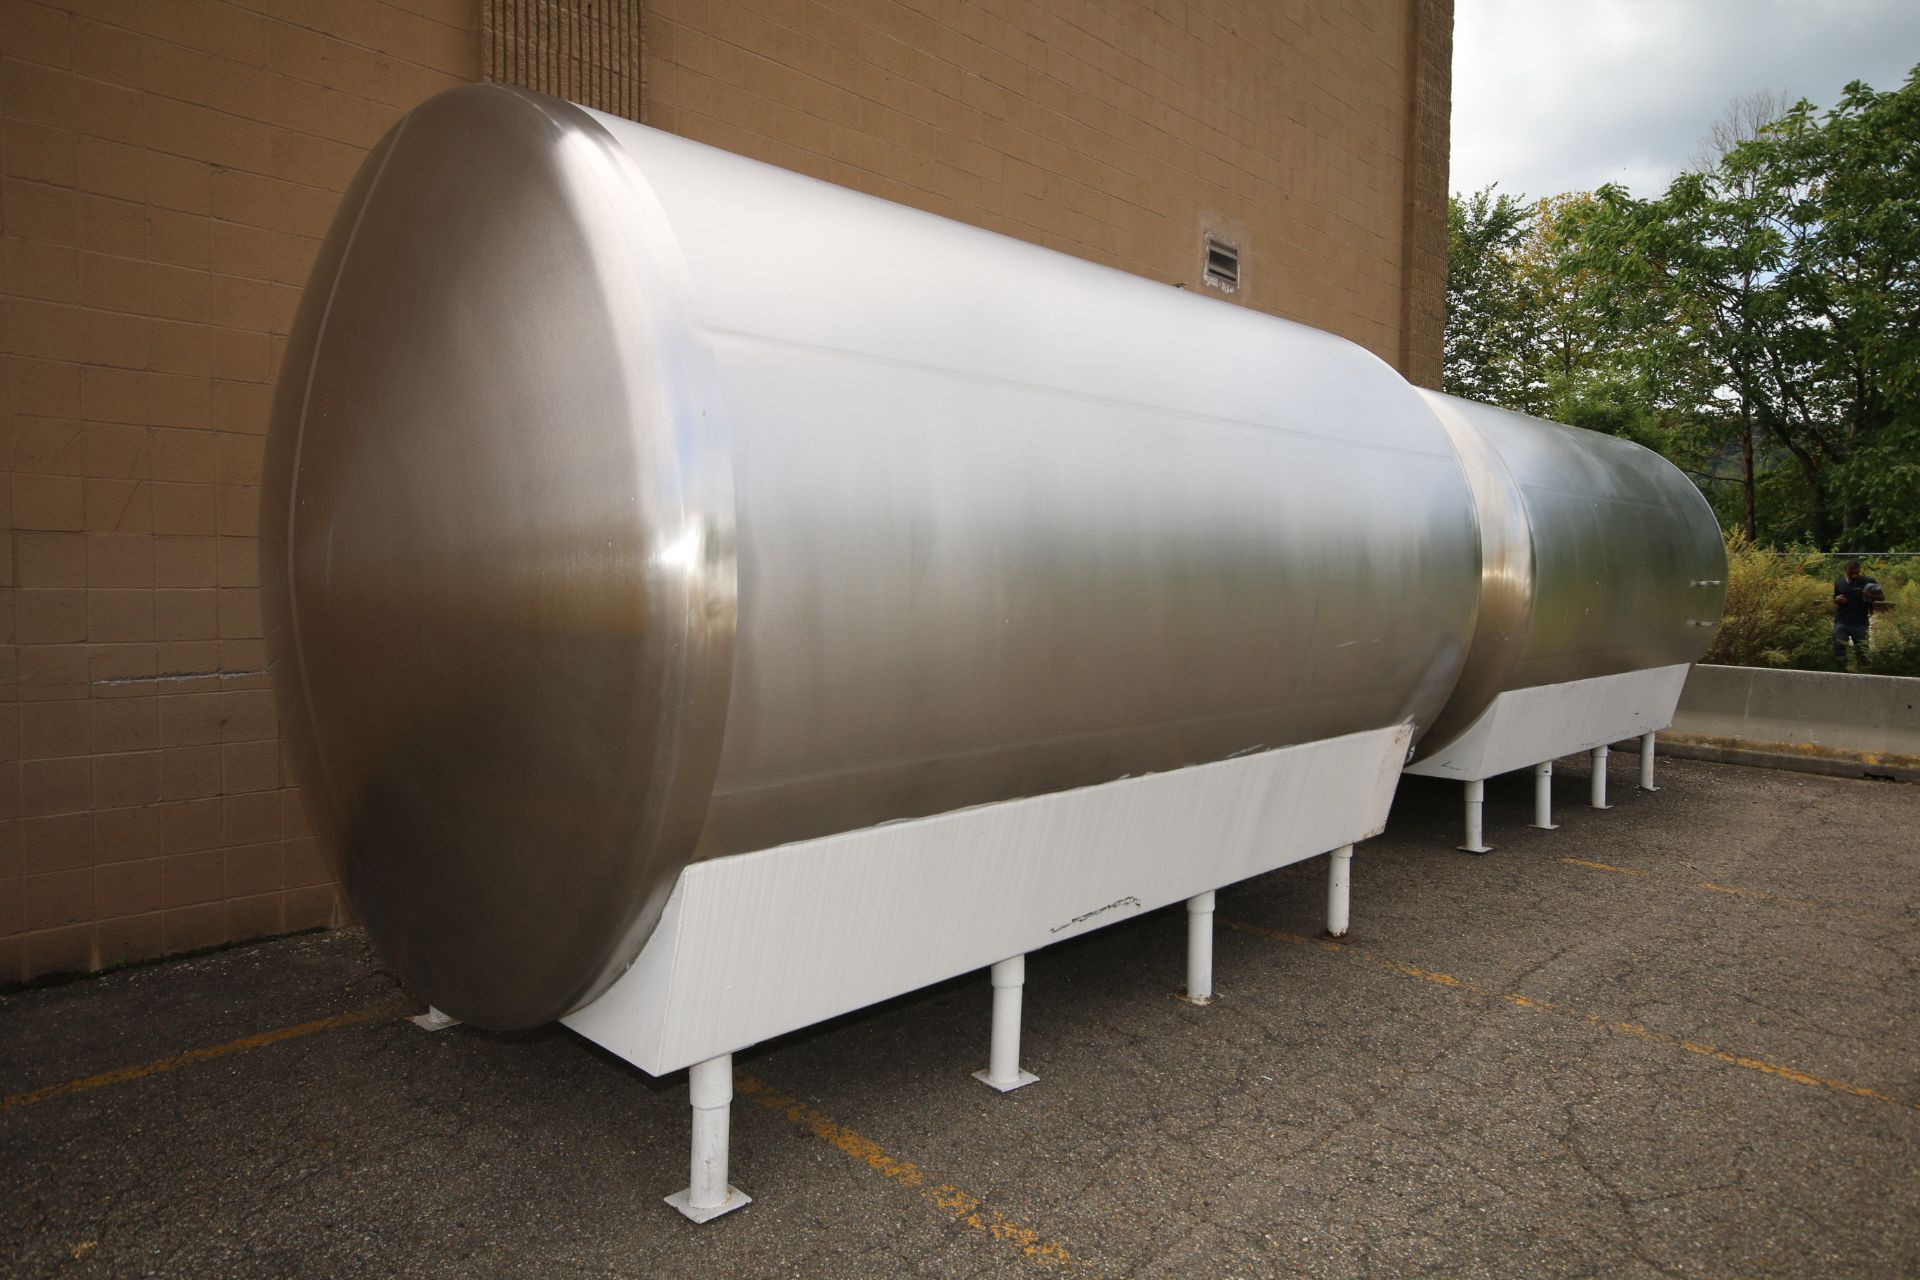 Cherry Burrell 5,000 Gal. S/S Horizontal Single Wall Tank, M/N HC, Equipped with Horizontal - Image 5 of 8